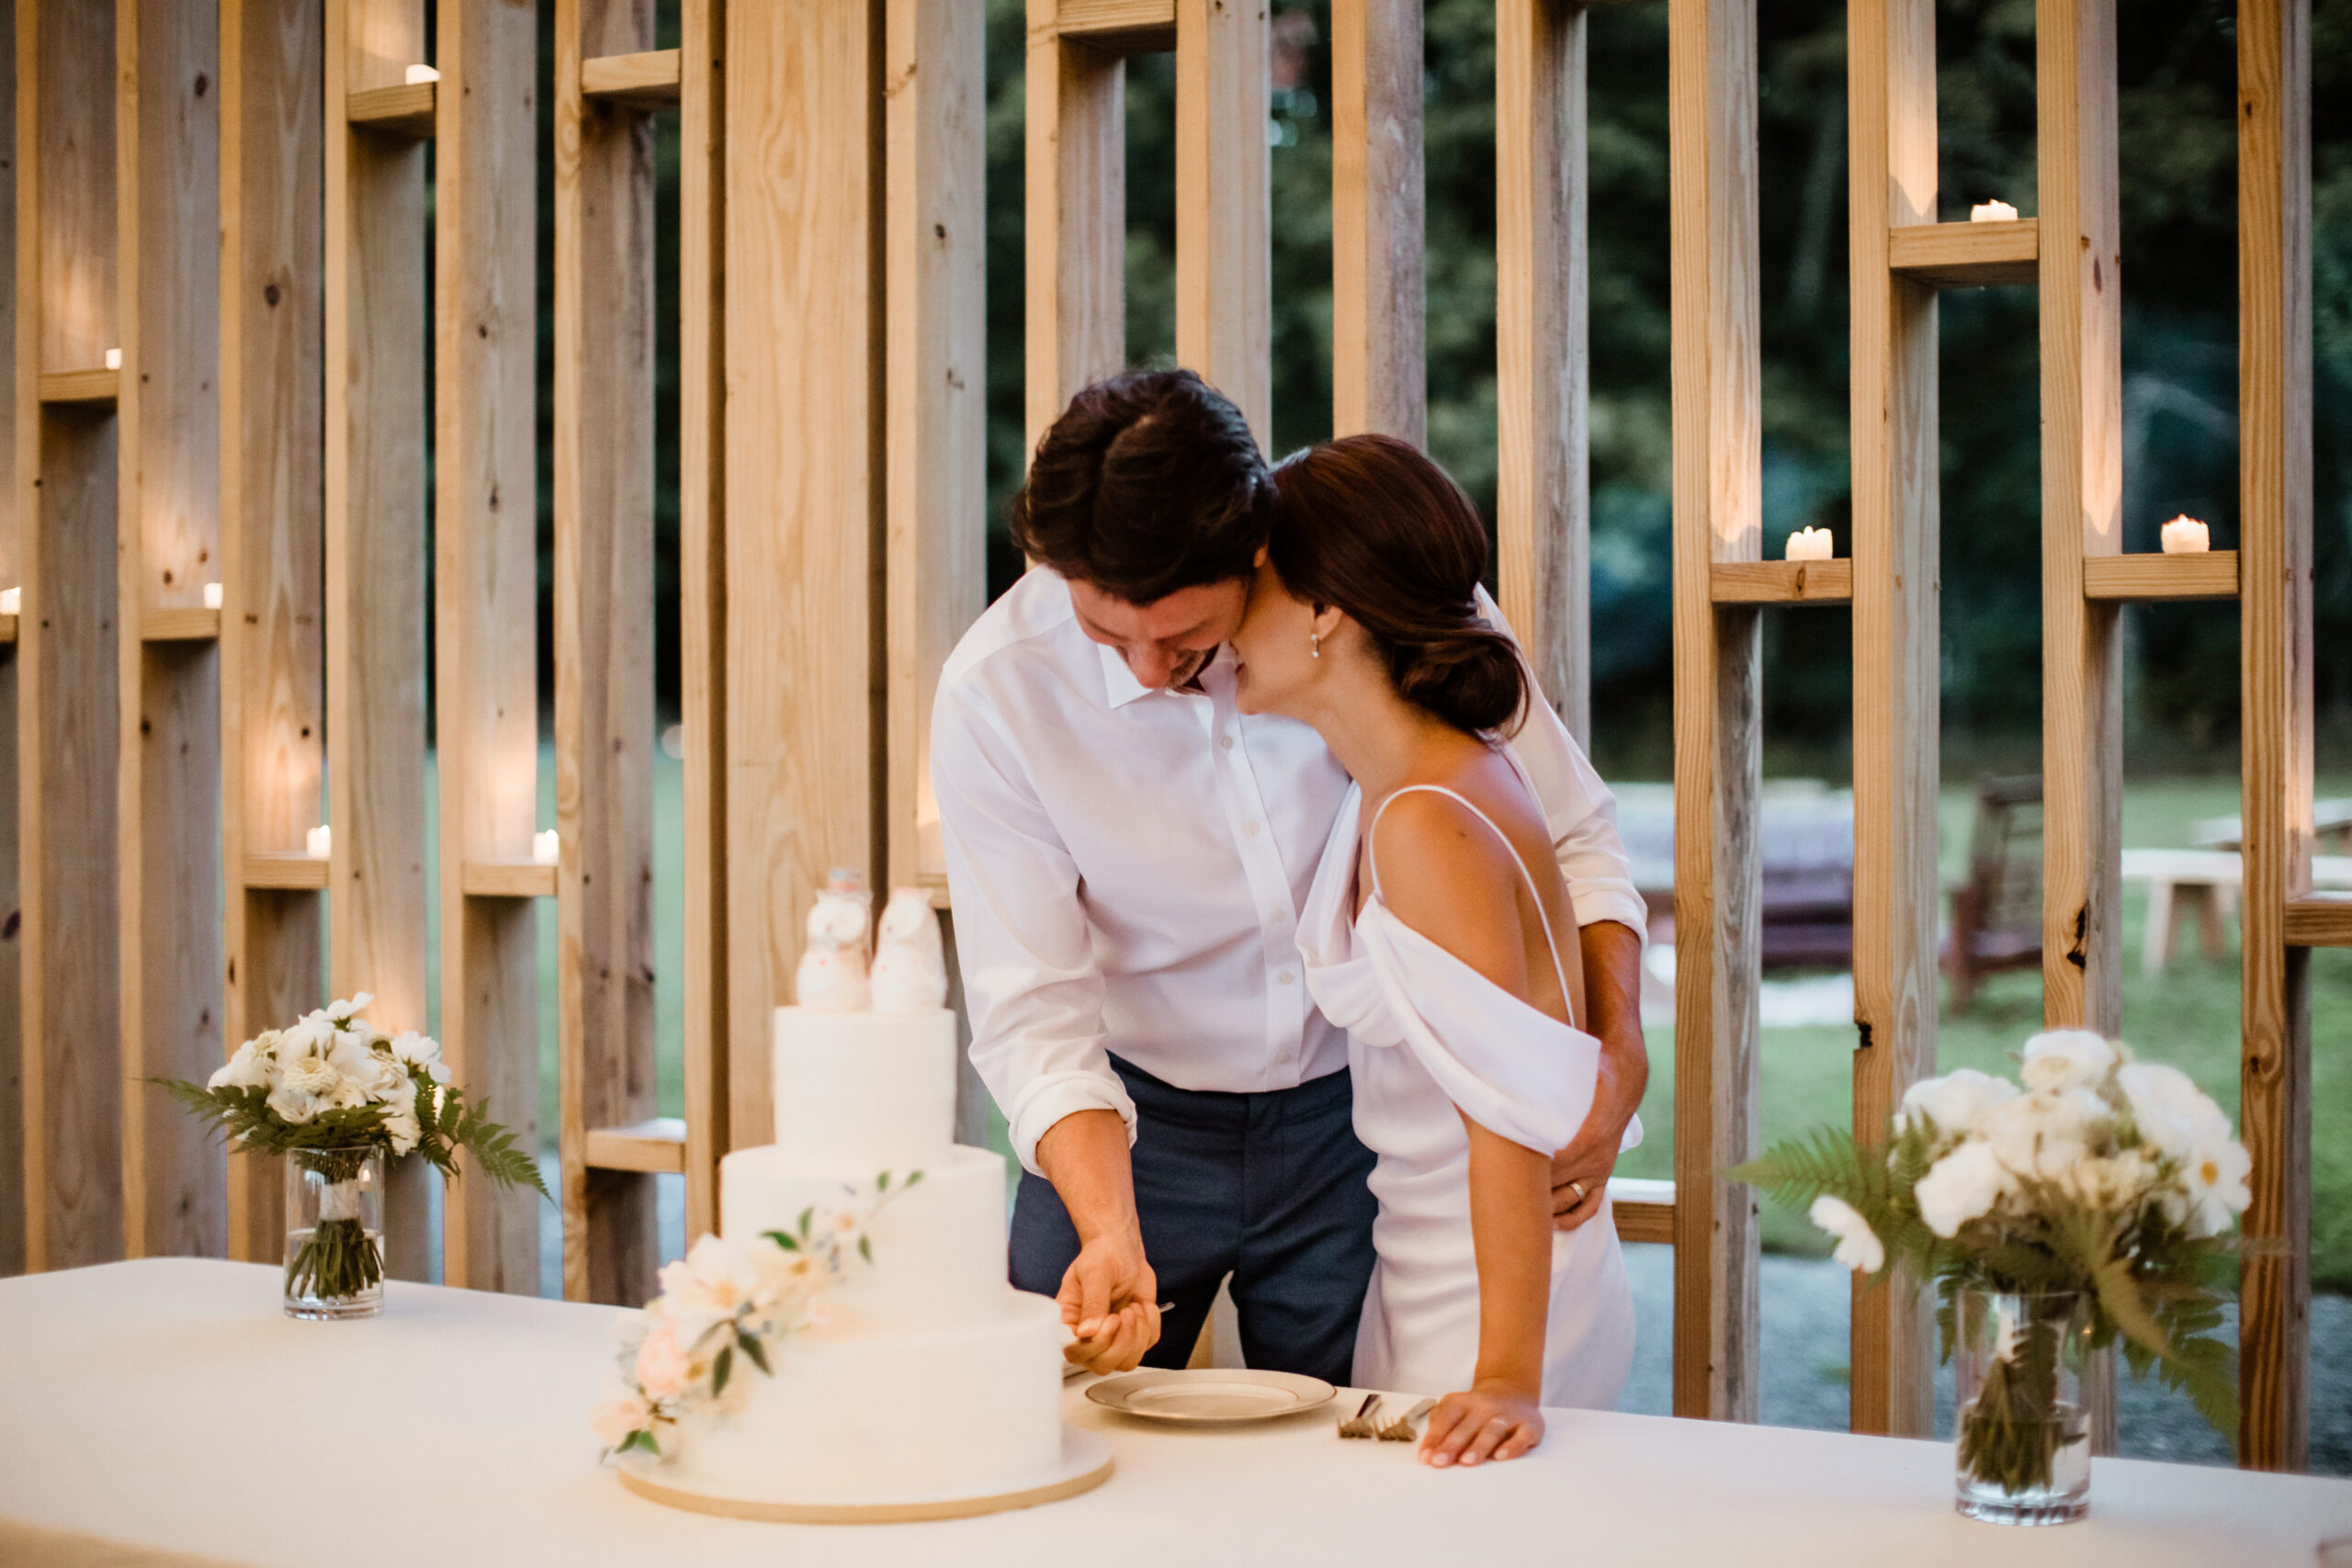 Stunning bride and groom cut their wedding cake on their dreamy upstate NY wedding day